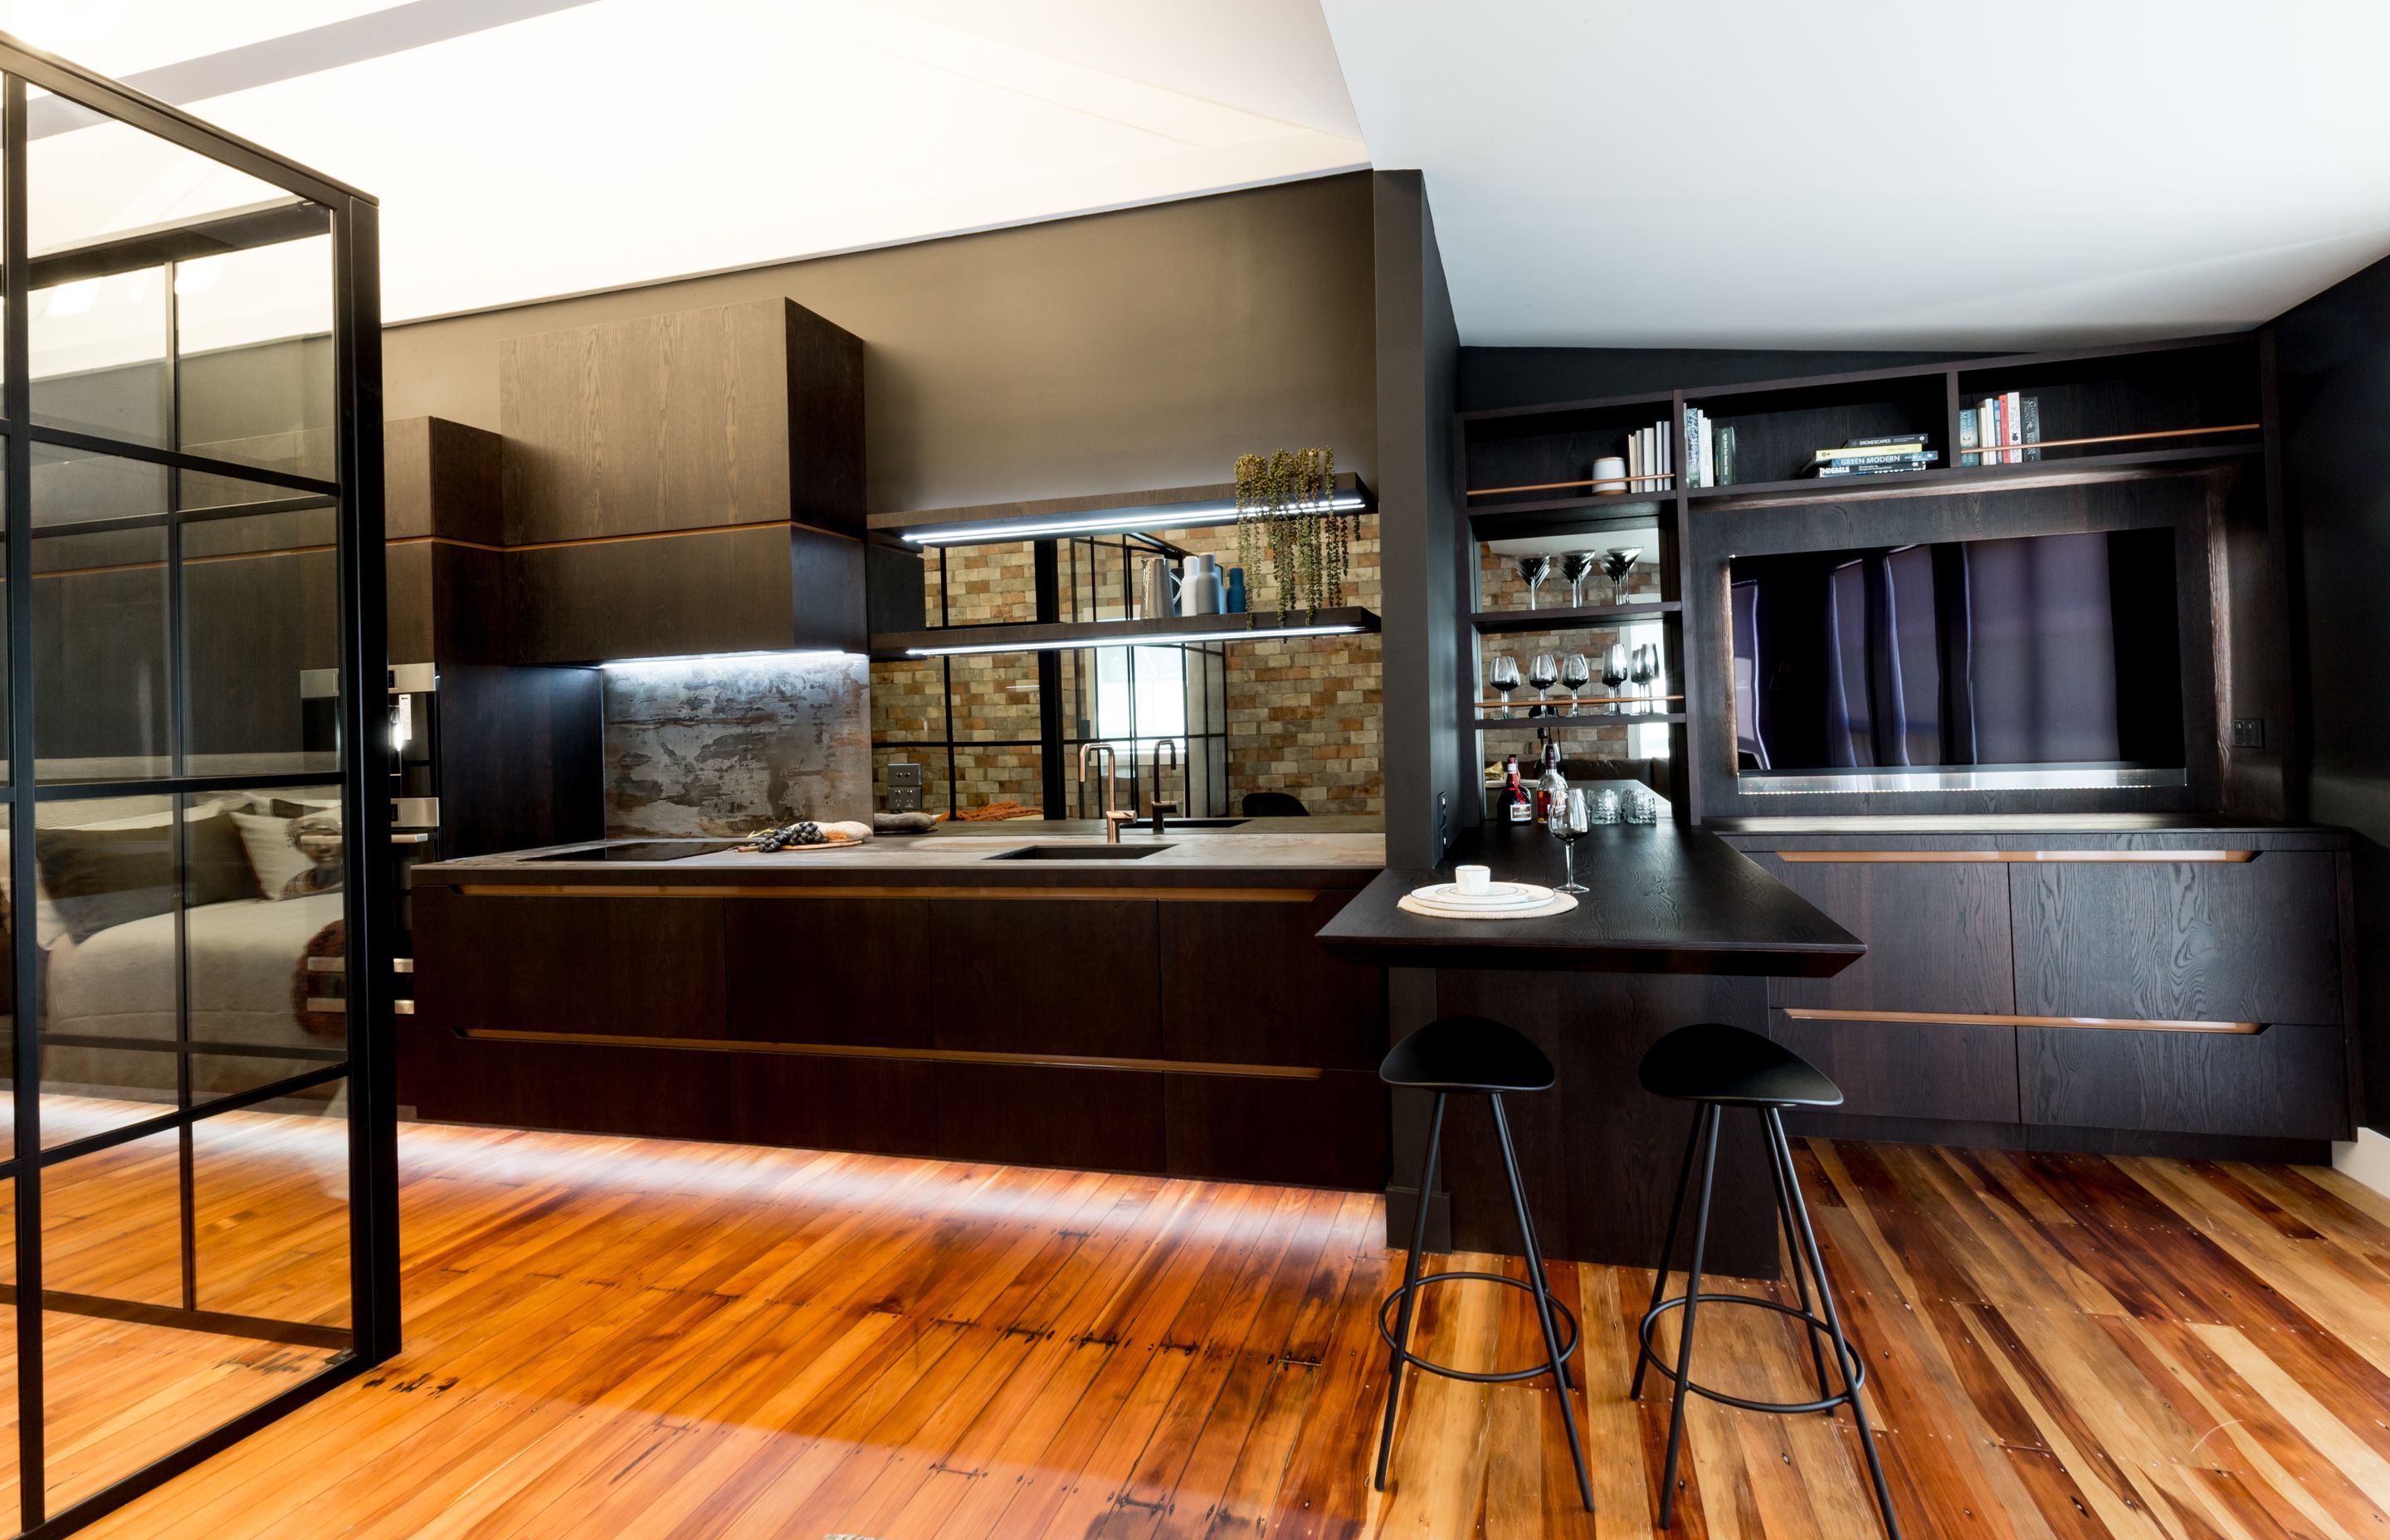 “New York” inspired kitchen showing symbiosis between functionality and design